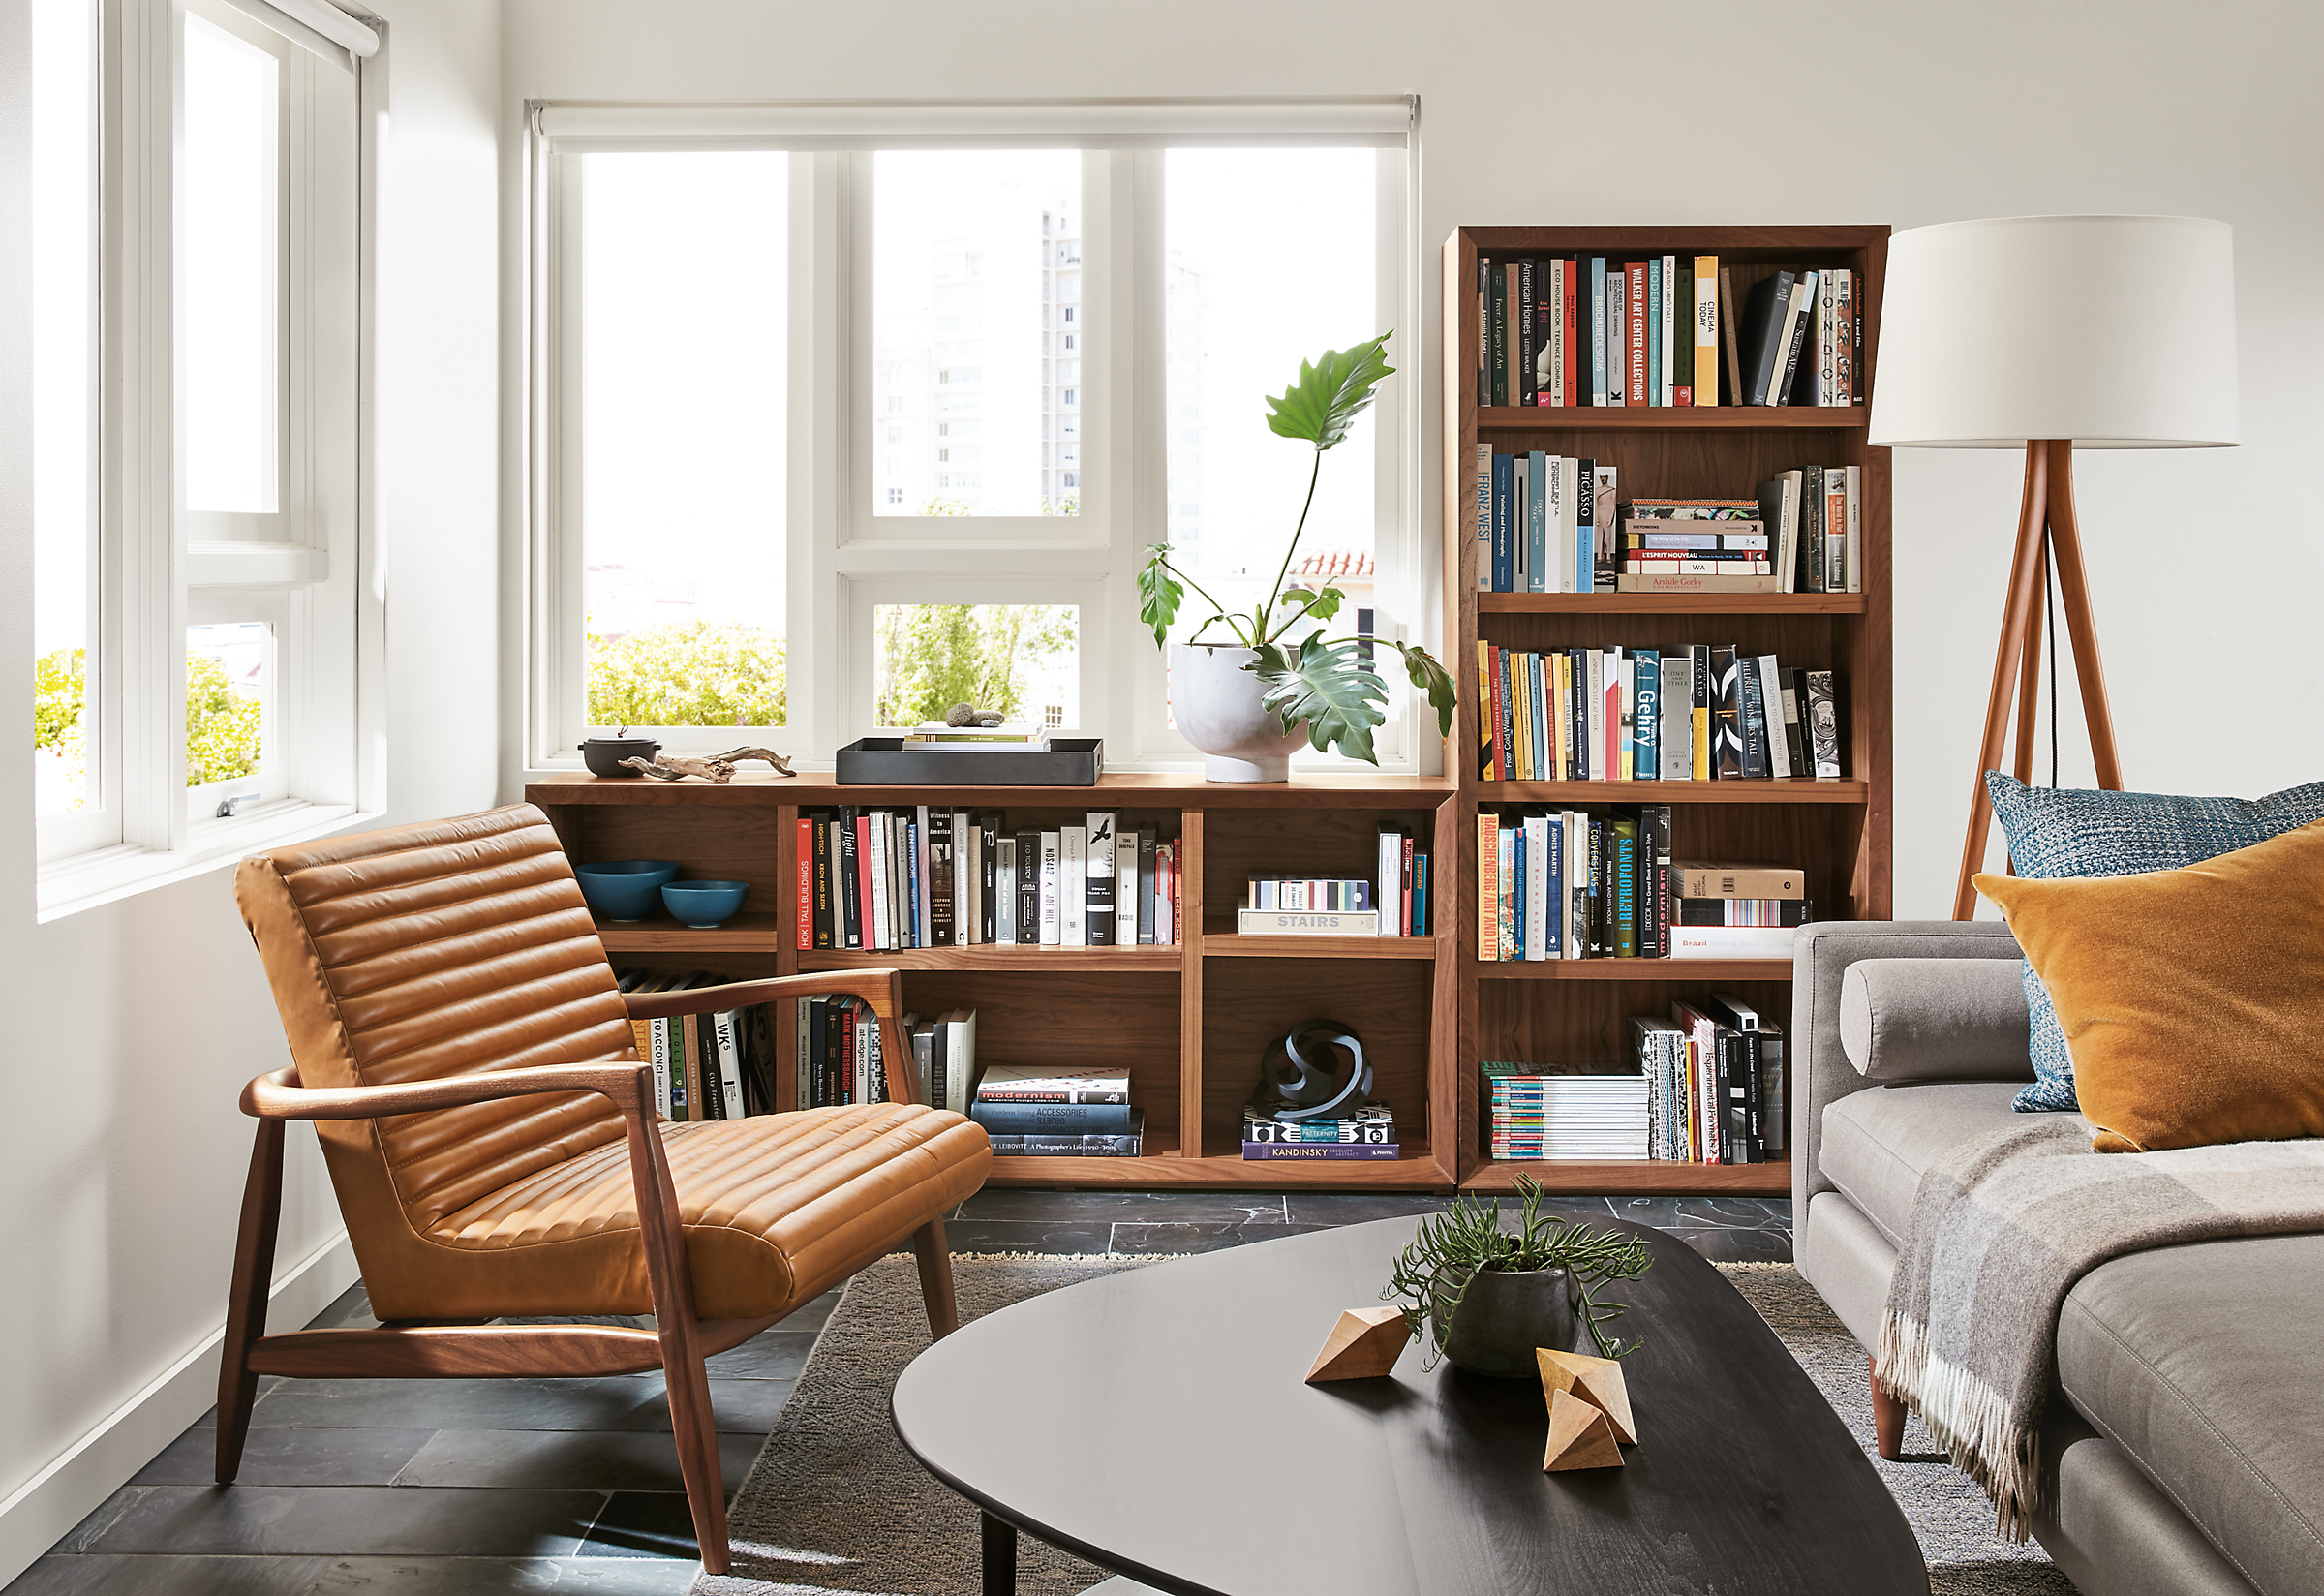 Detail of 2 Lennox bookcases in living room with Callan chair.